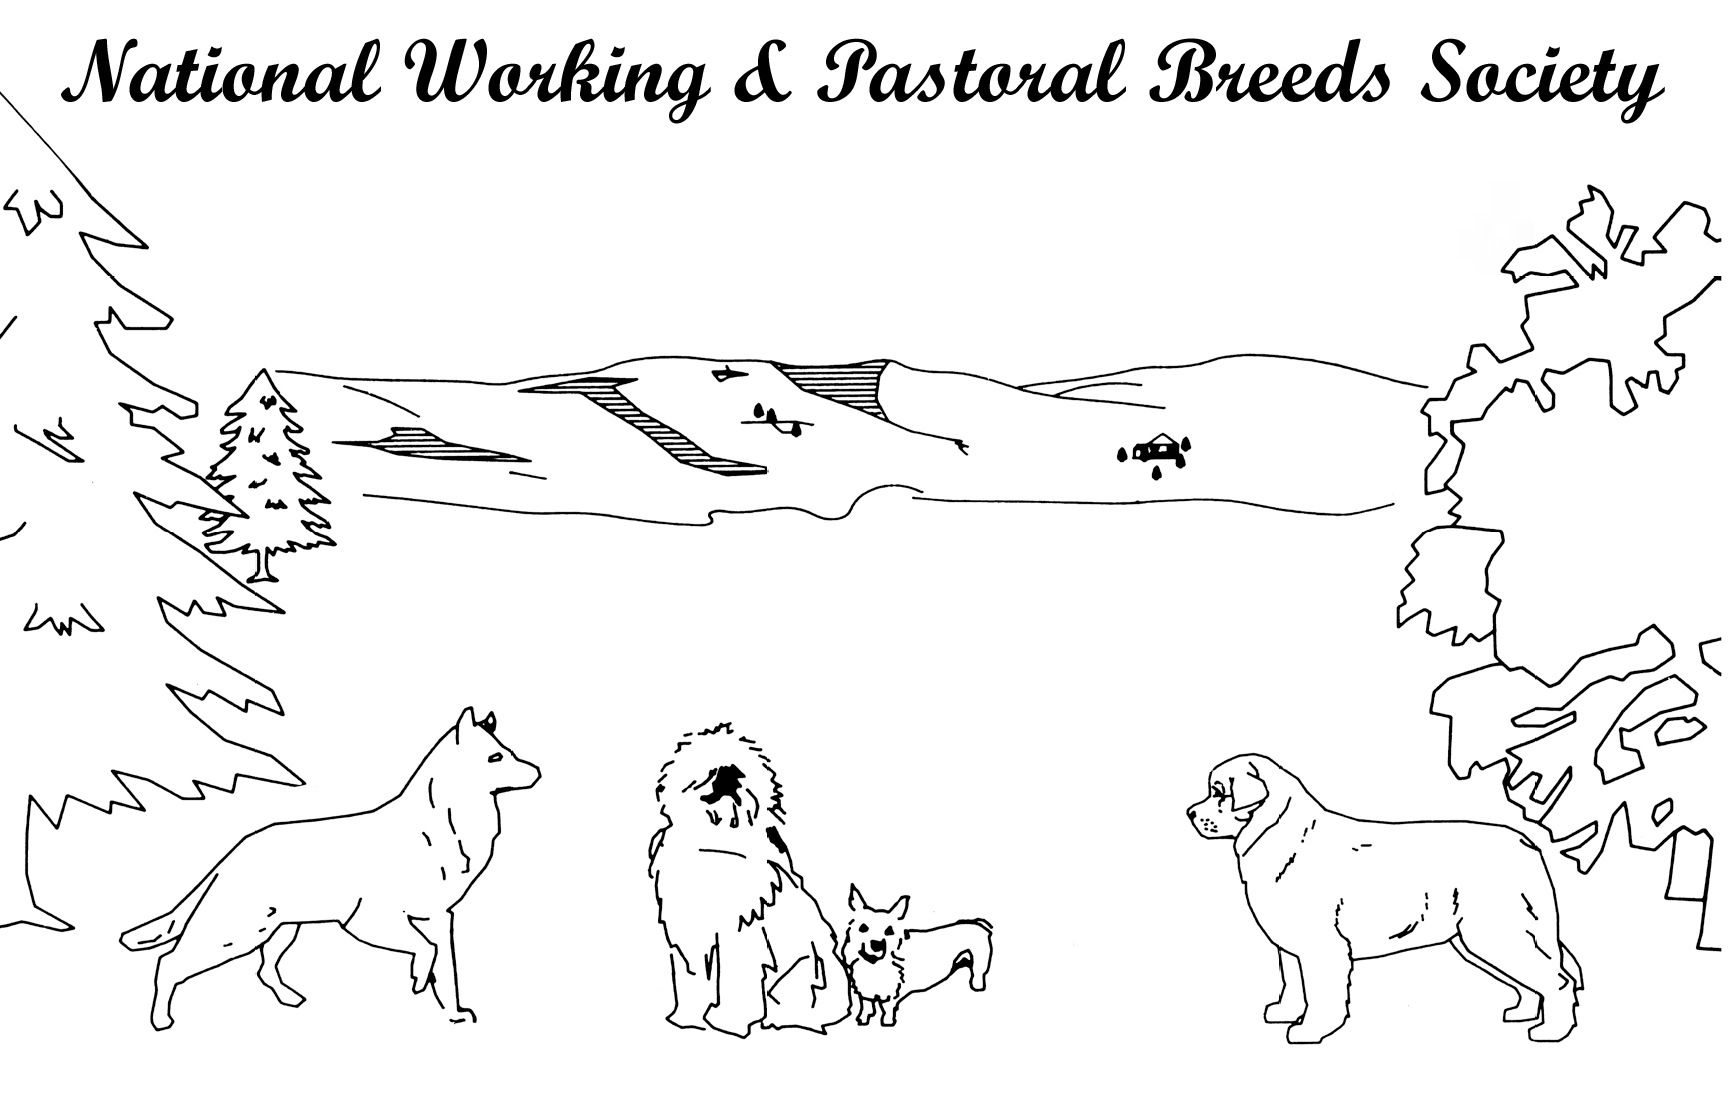 NATIONAL WORKING & PASTORAL BREEDS SOCIETY - Ch